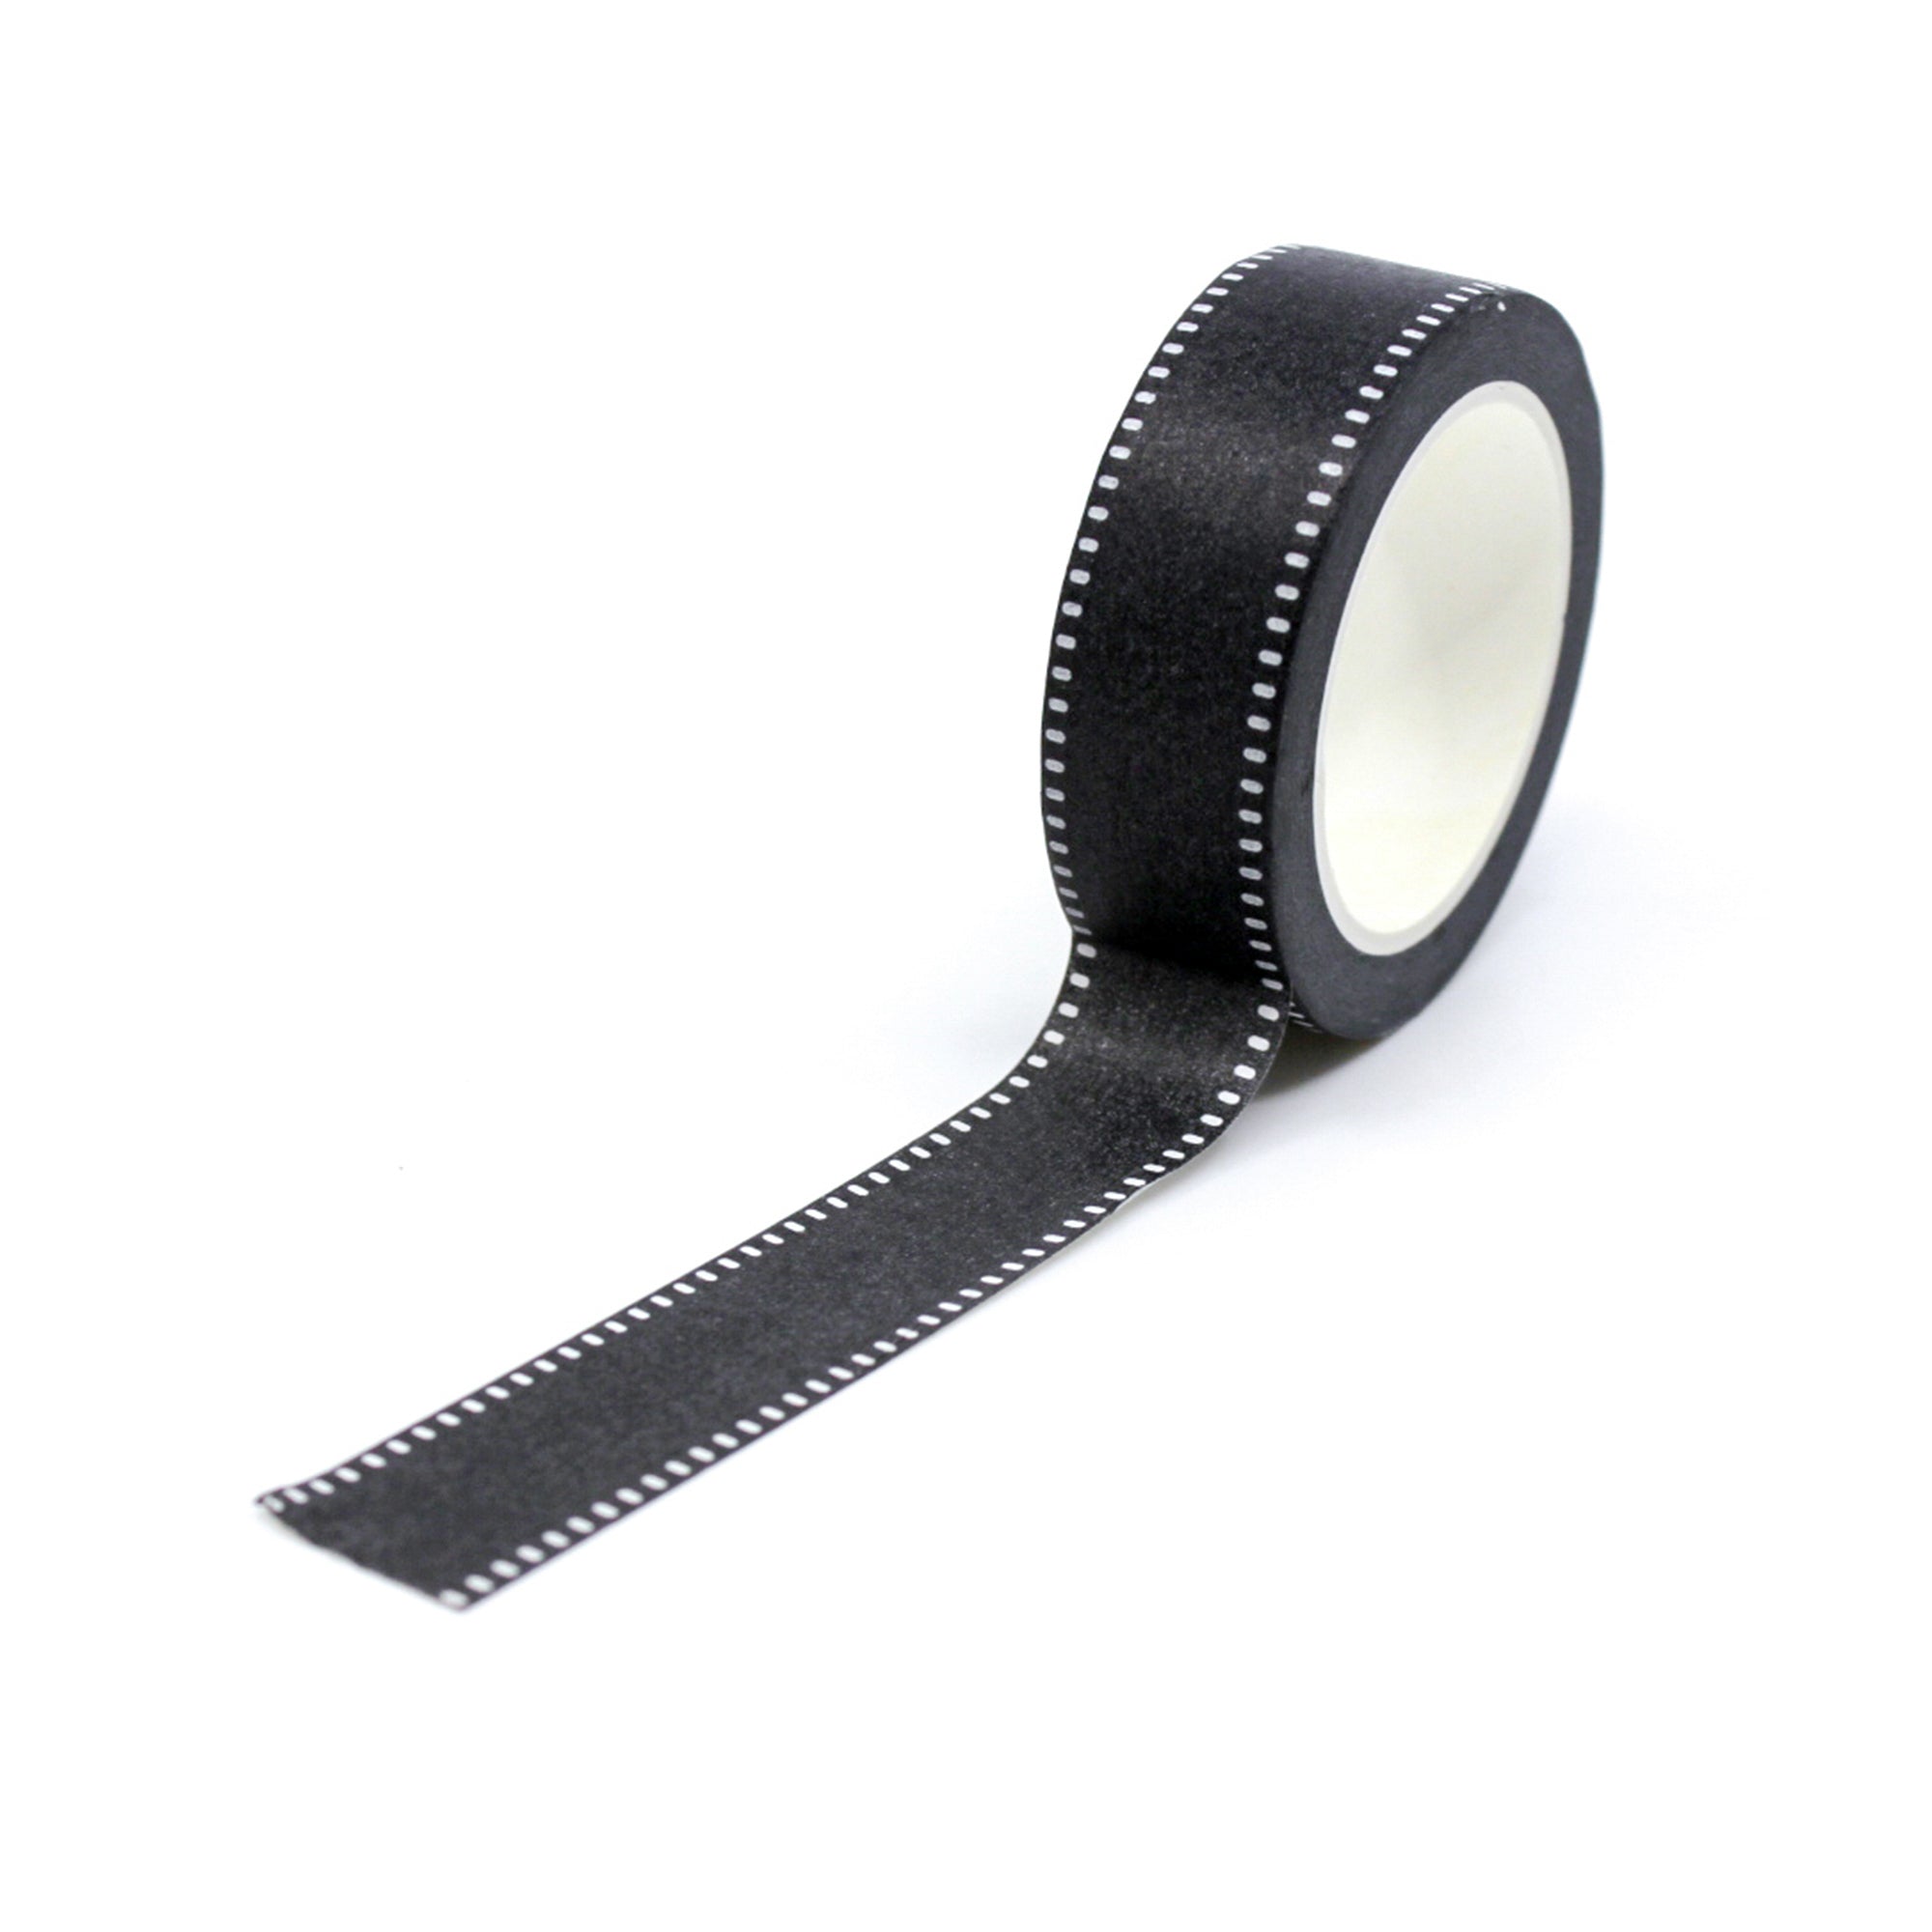 Enhance your creations with our captivating black faux grosgrain ribbon washi tape, showcasing a chic ribbon-like pattern that brings a sense of style and refinement to your crafts. This tape is sold at BBB Supplies Craft Shop.